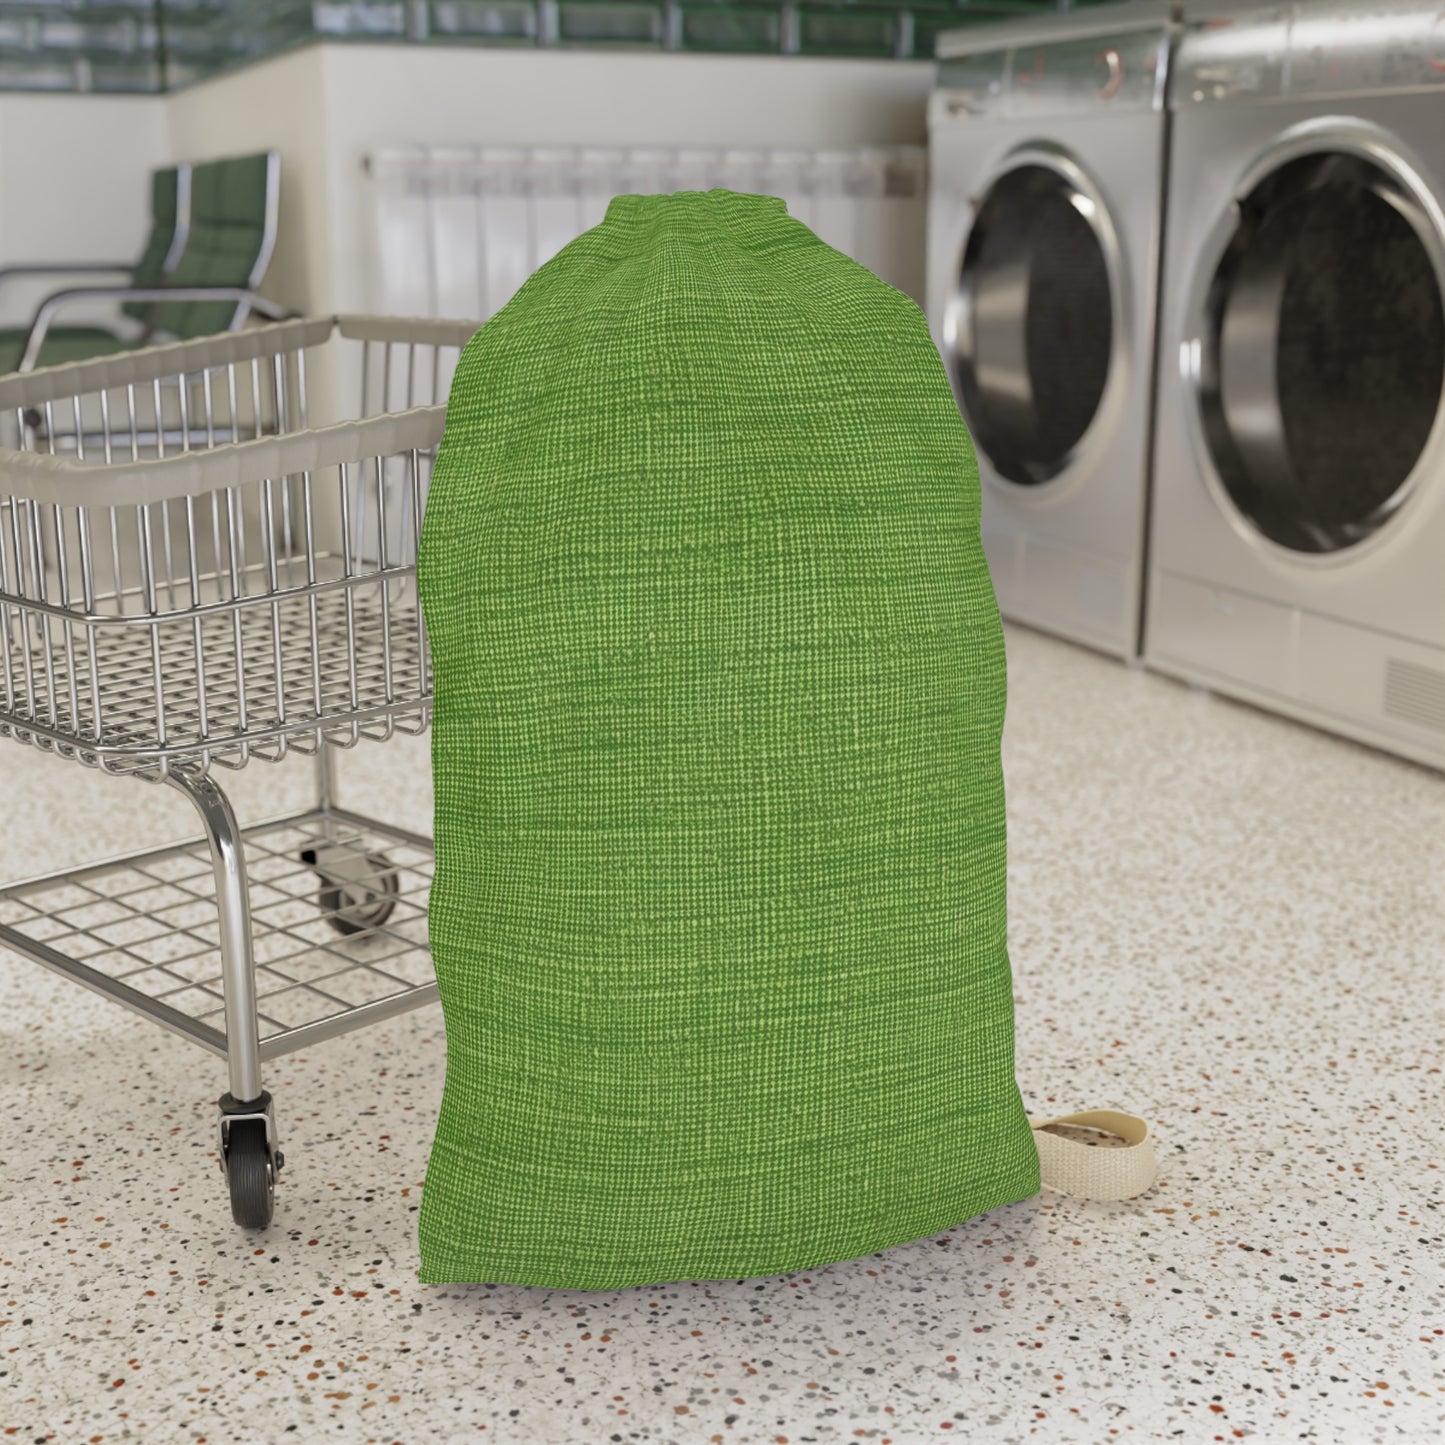 Olive Green Denim-Style: Seamless, Textured Fabric - Laundry Bag